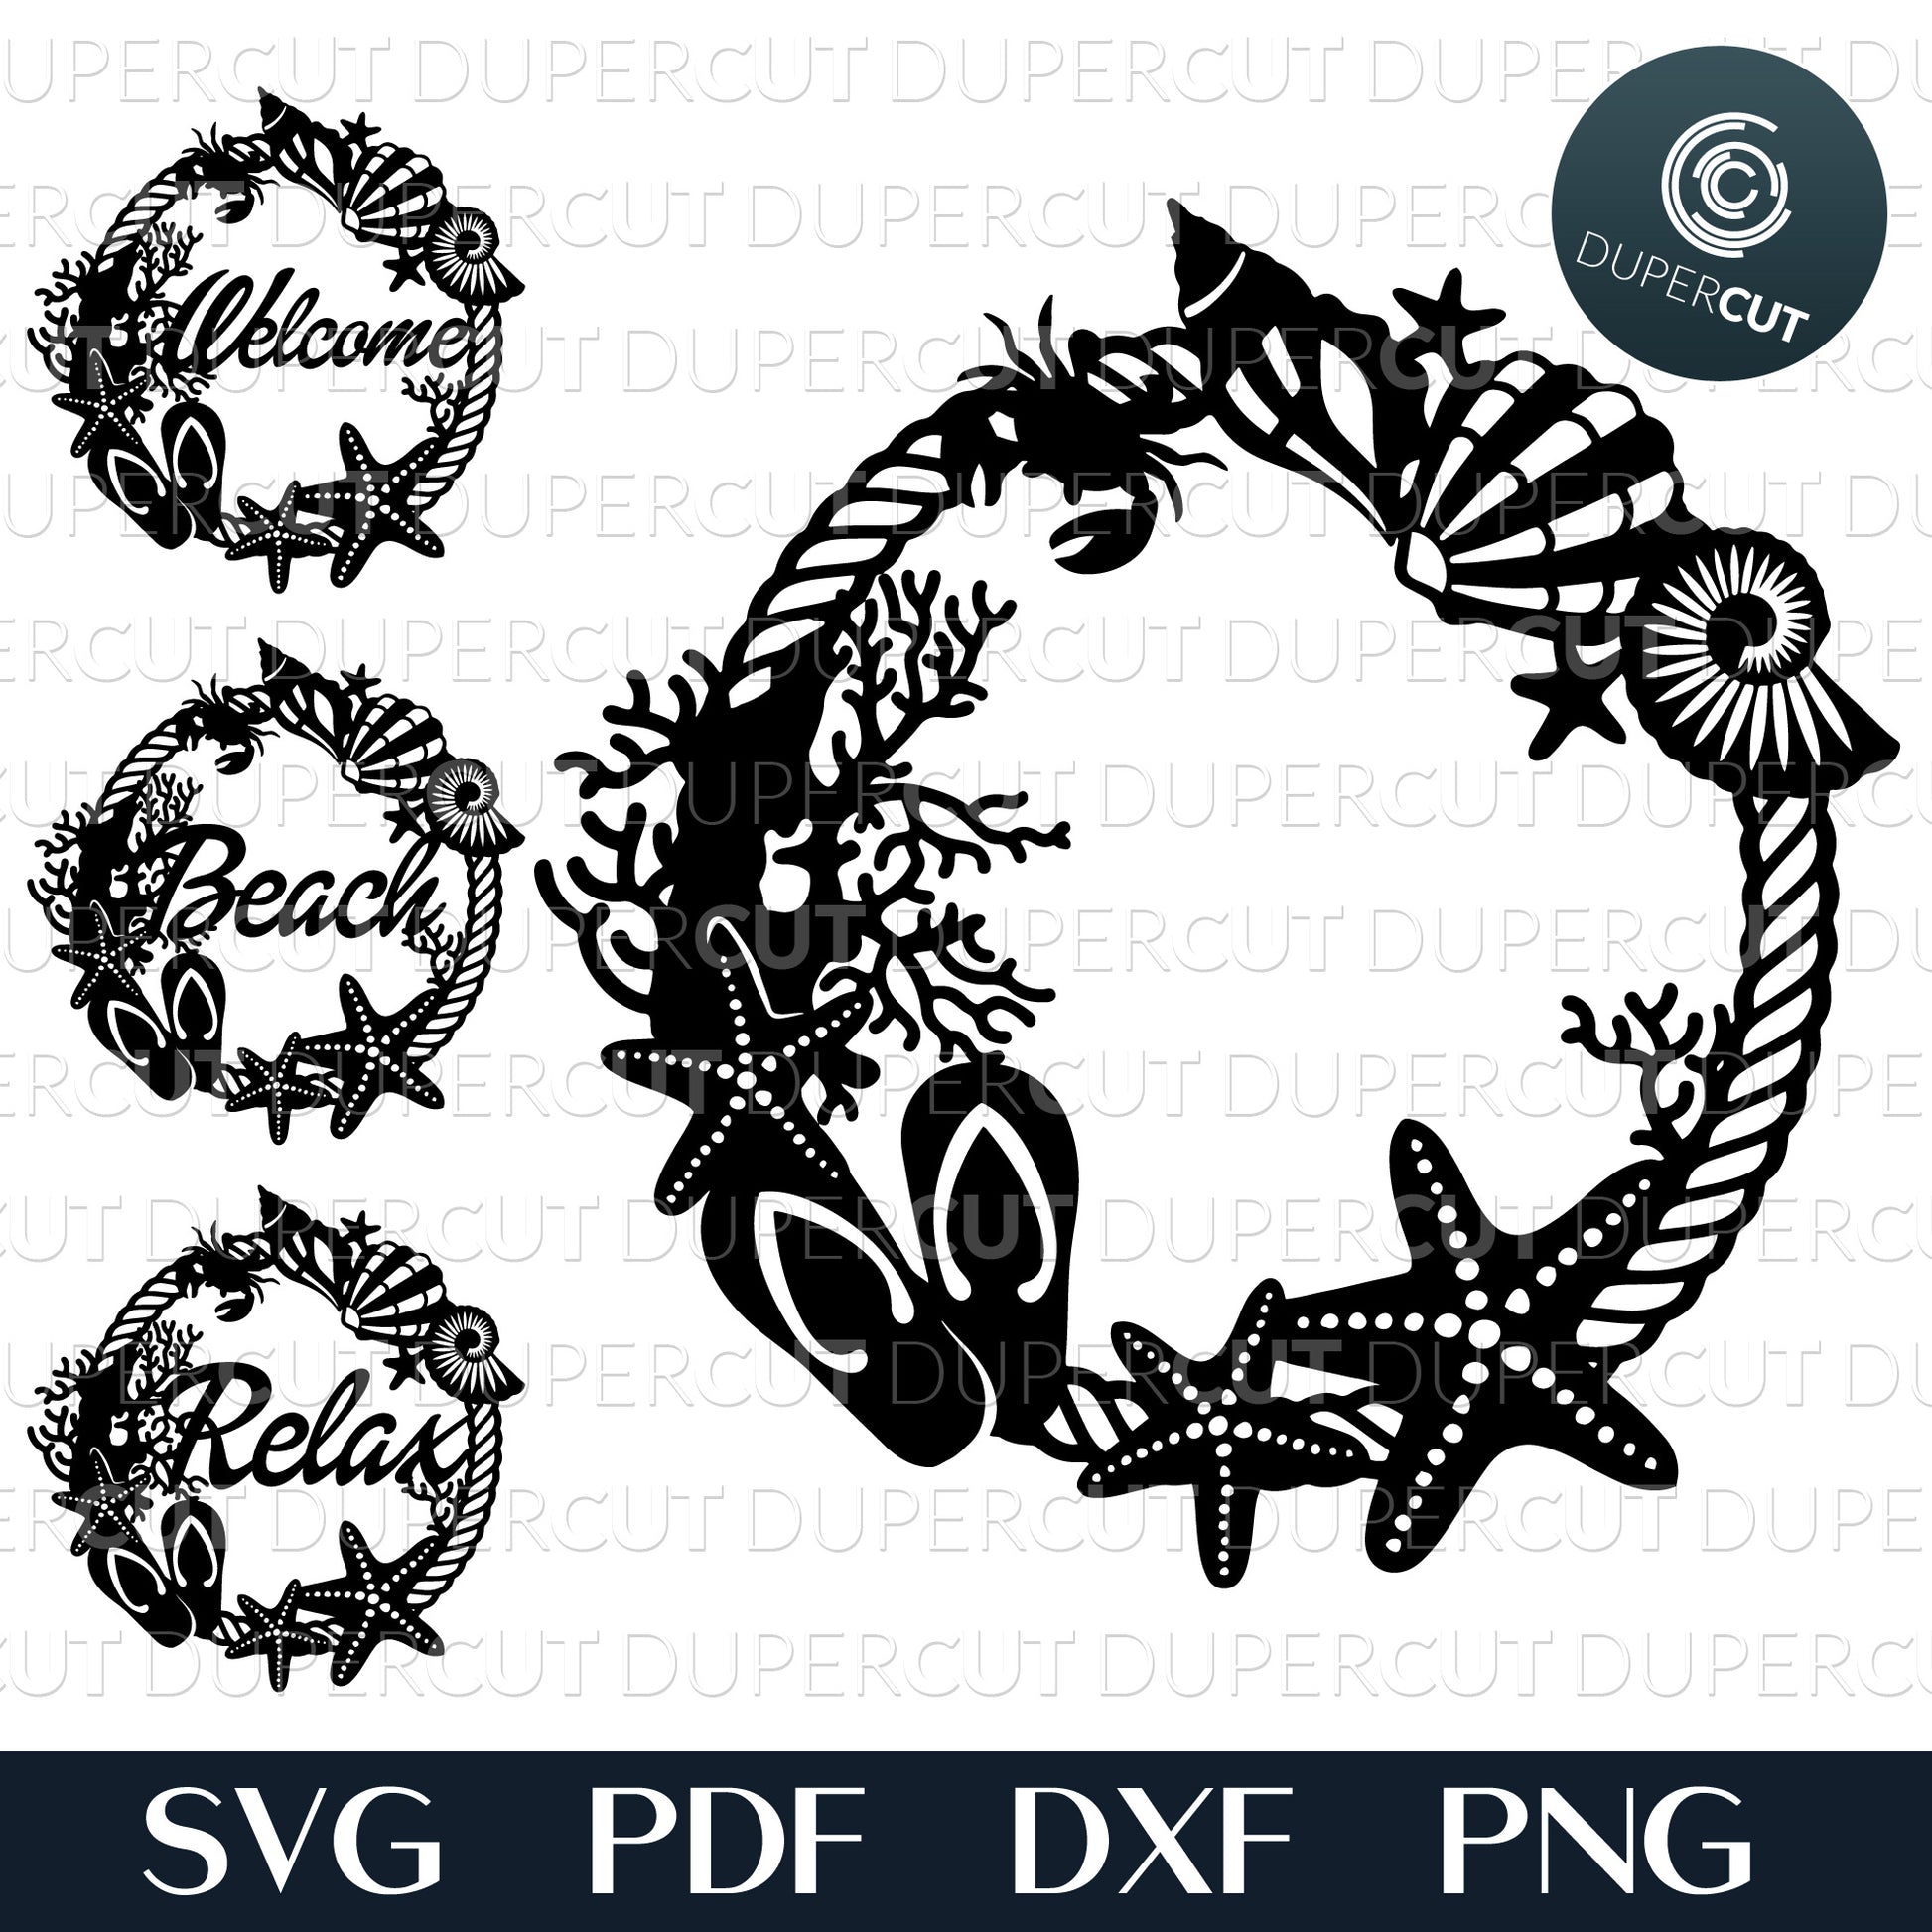 Nautical wreath with a beach vibe, cottage decoration. Seashells, starfish, flip-flops and corals. Layered SVG DXF vector files for Criuct, Glowforge, Silhouette, laser cutting and engraving.